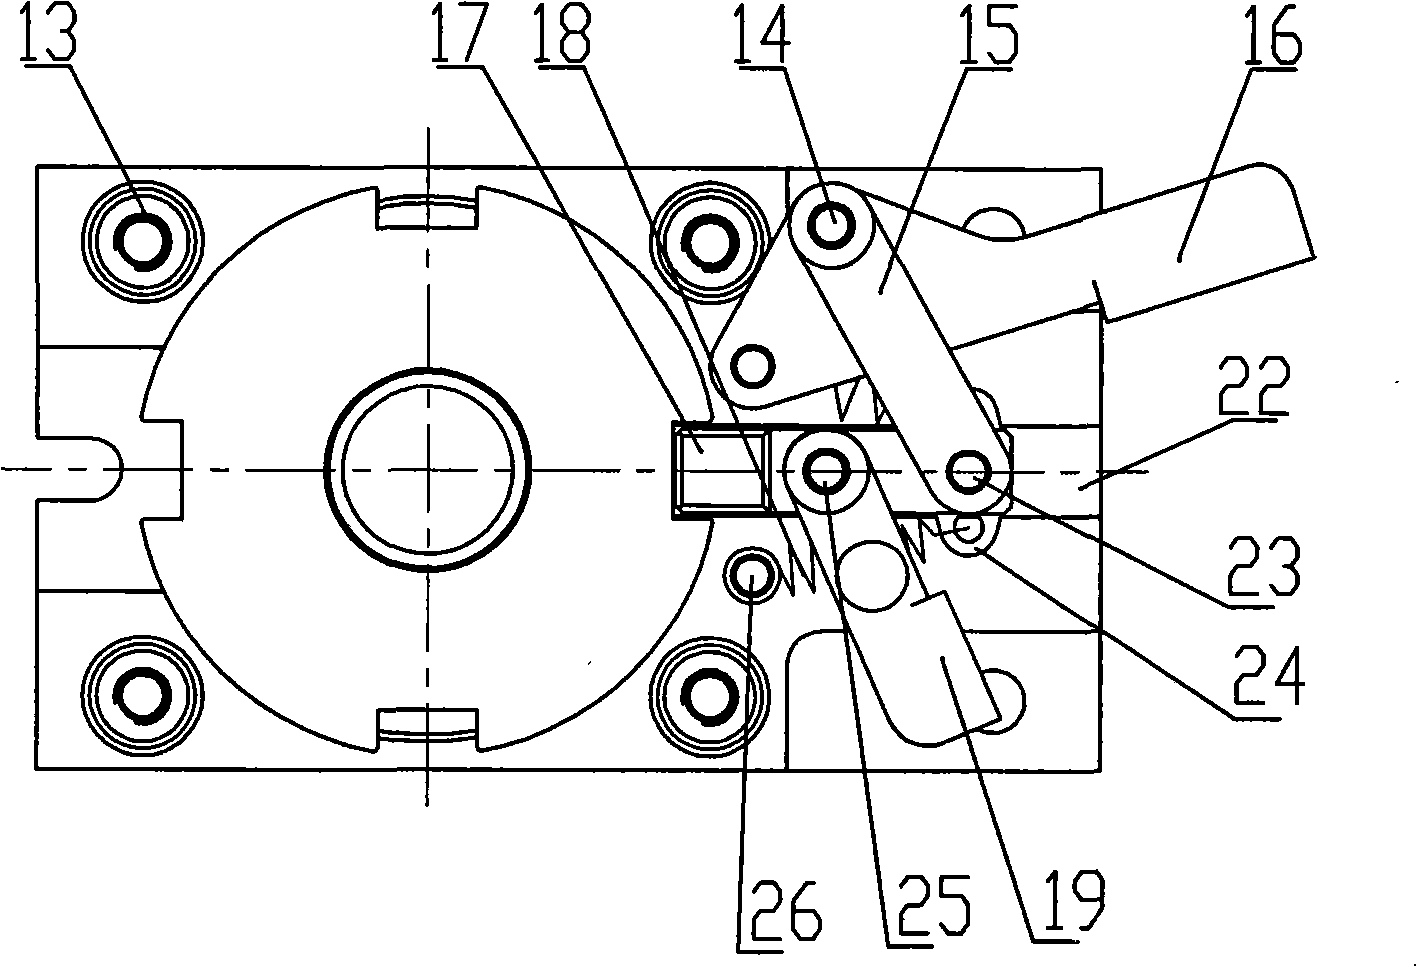 Soft interlocking mechanism for switch cabinet vehicle-in/out apparatus